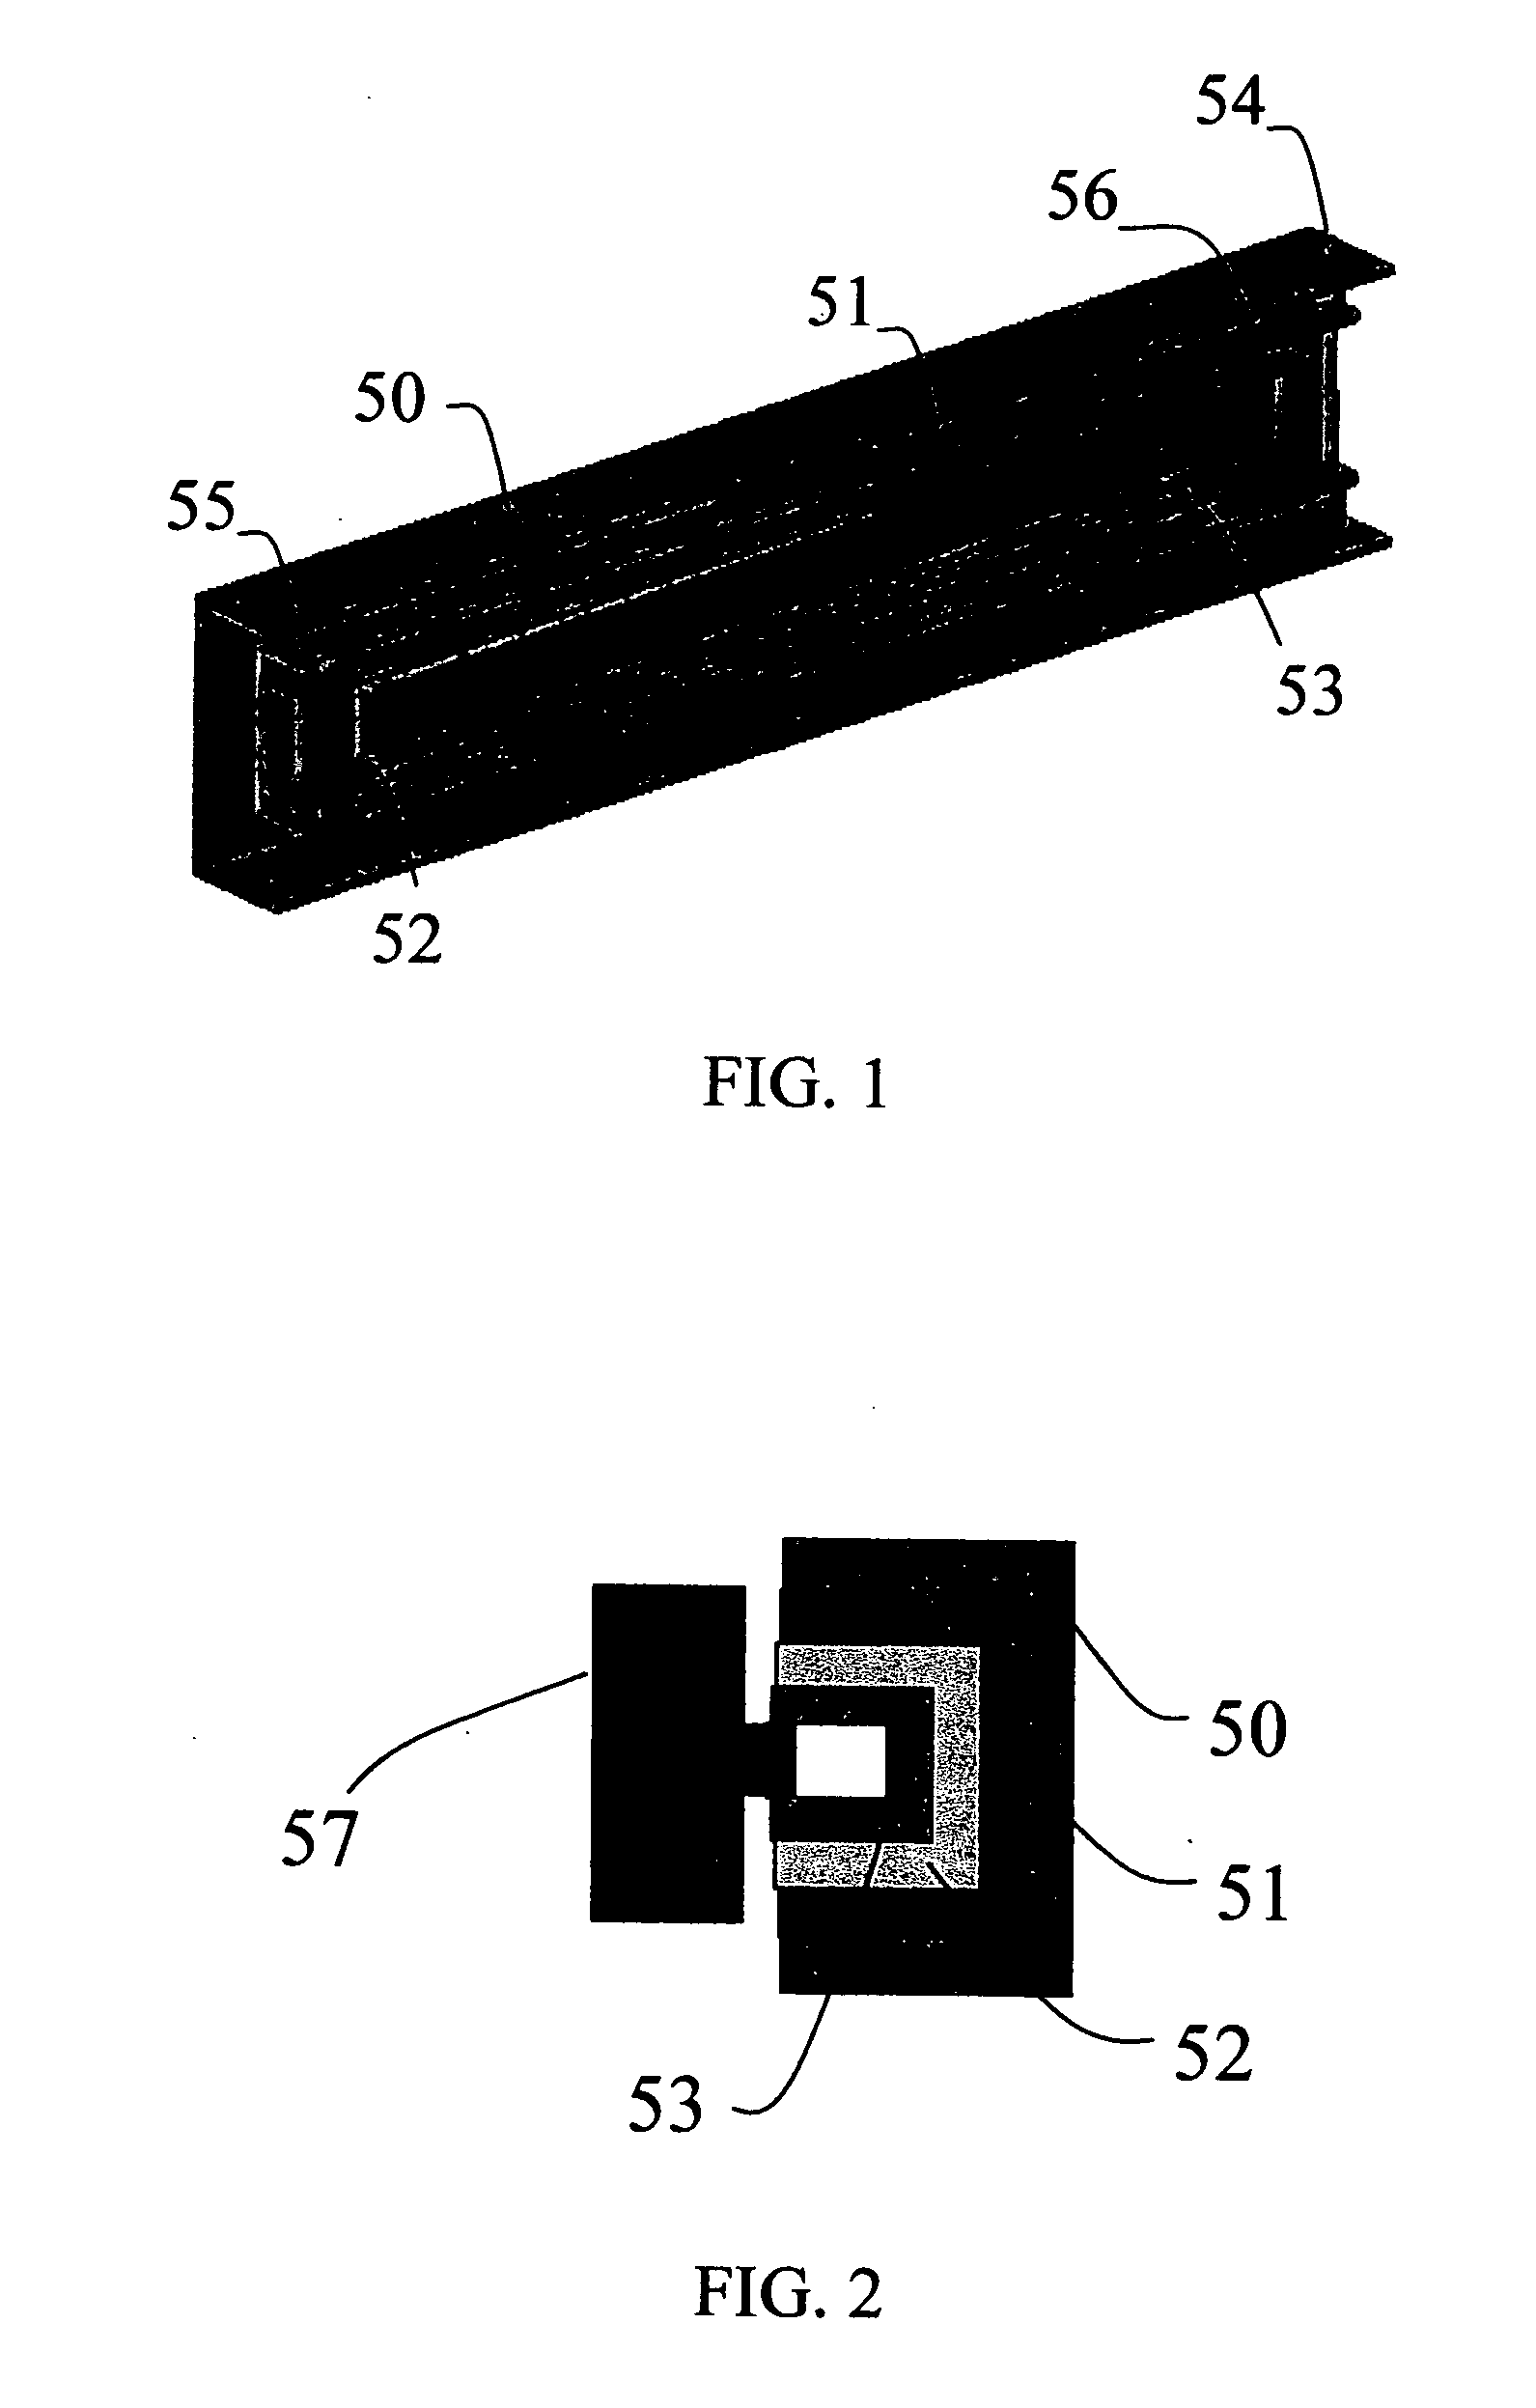 Gravity driven underactuated robot arm for assembly operations inside an aircraft wing box